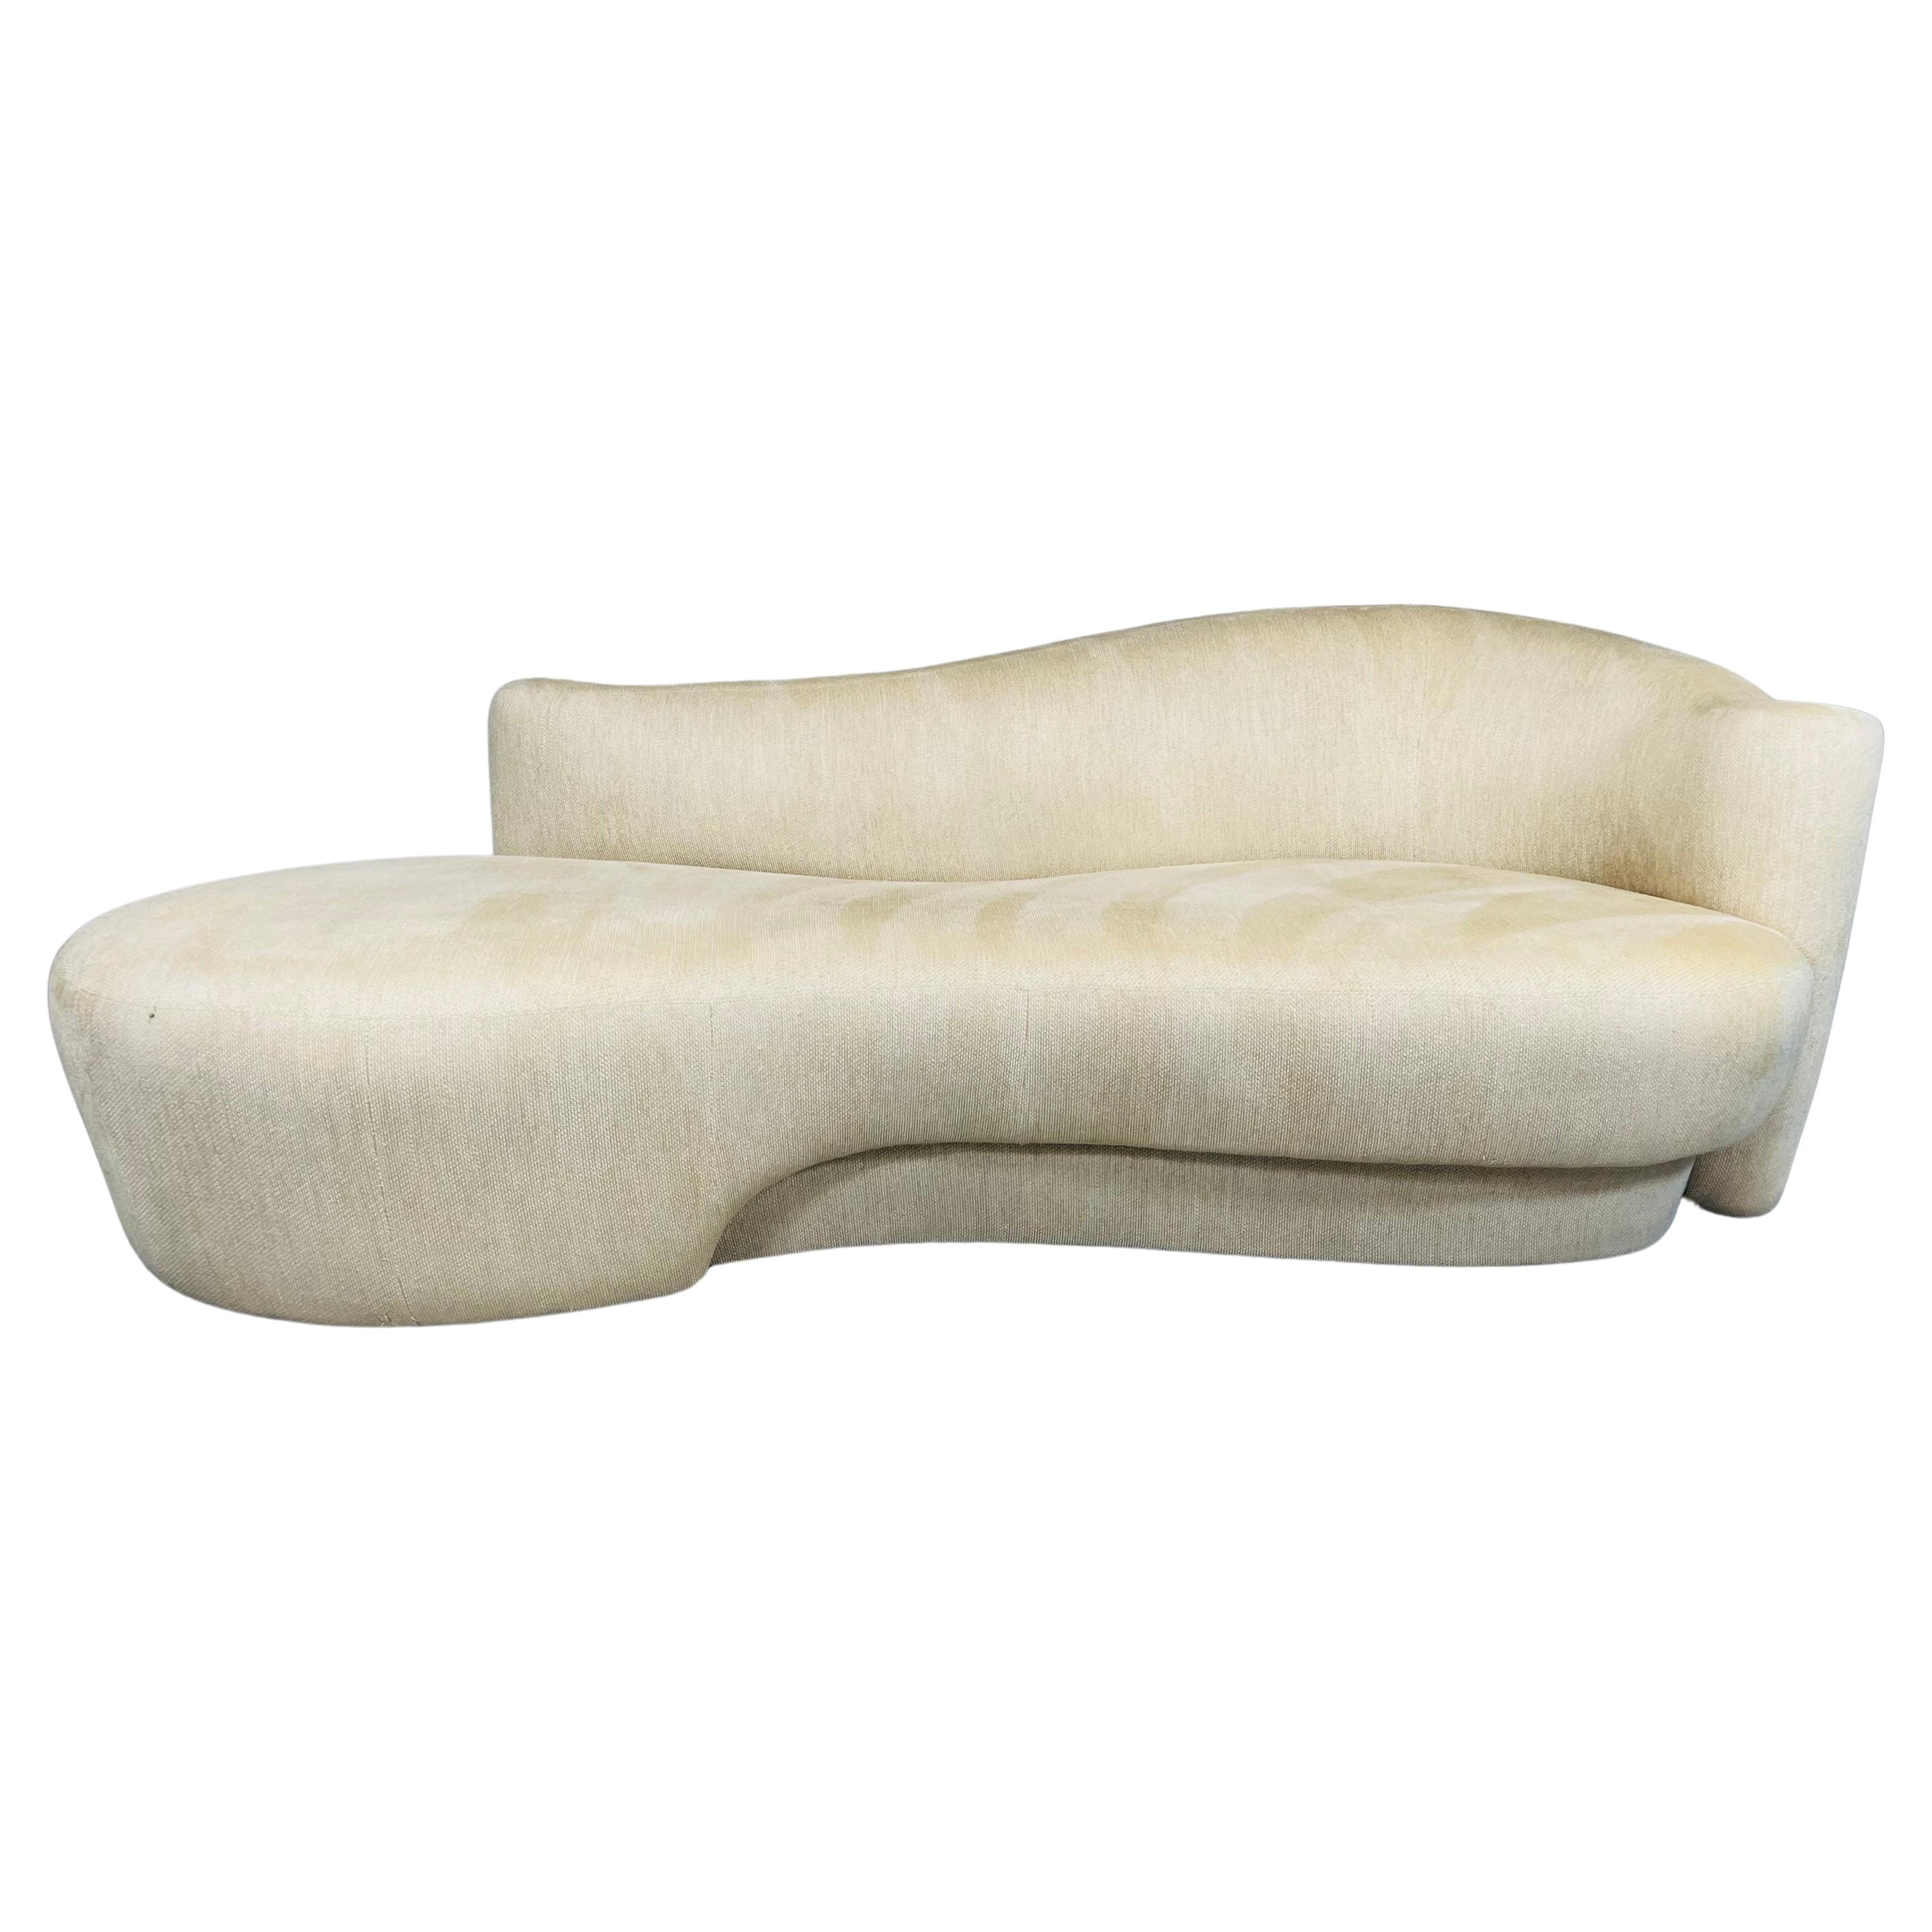 Weiman Post Modern Cloud Sofa Chaise Lounge c. 1990 (Fabric Stain) 